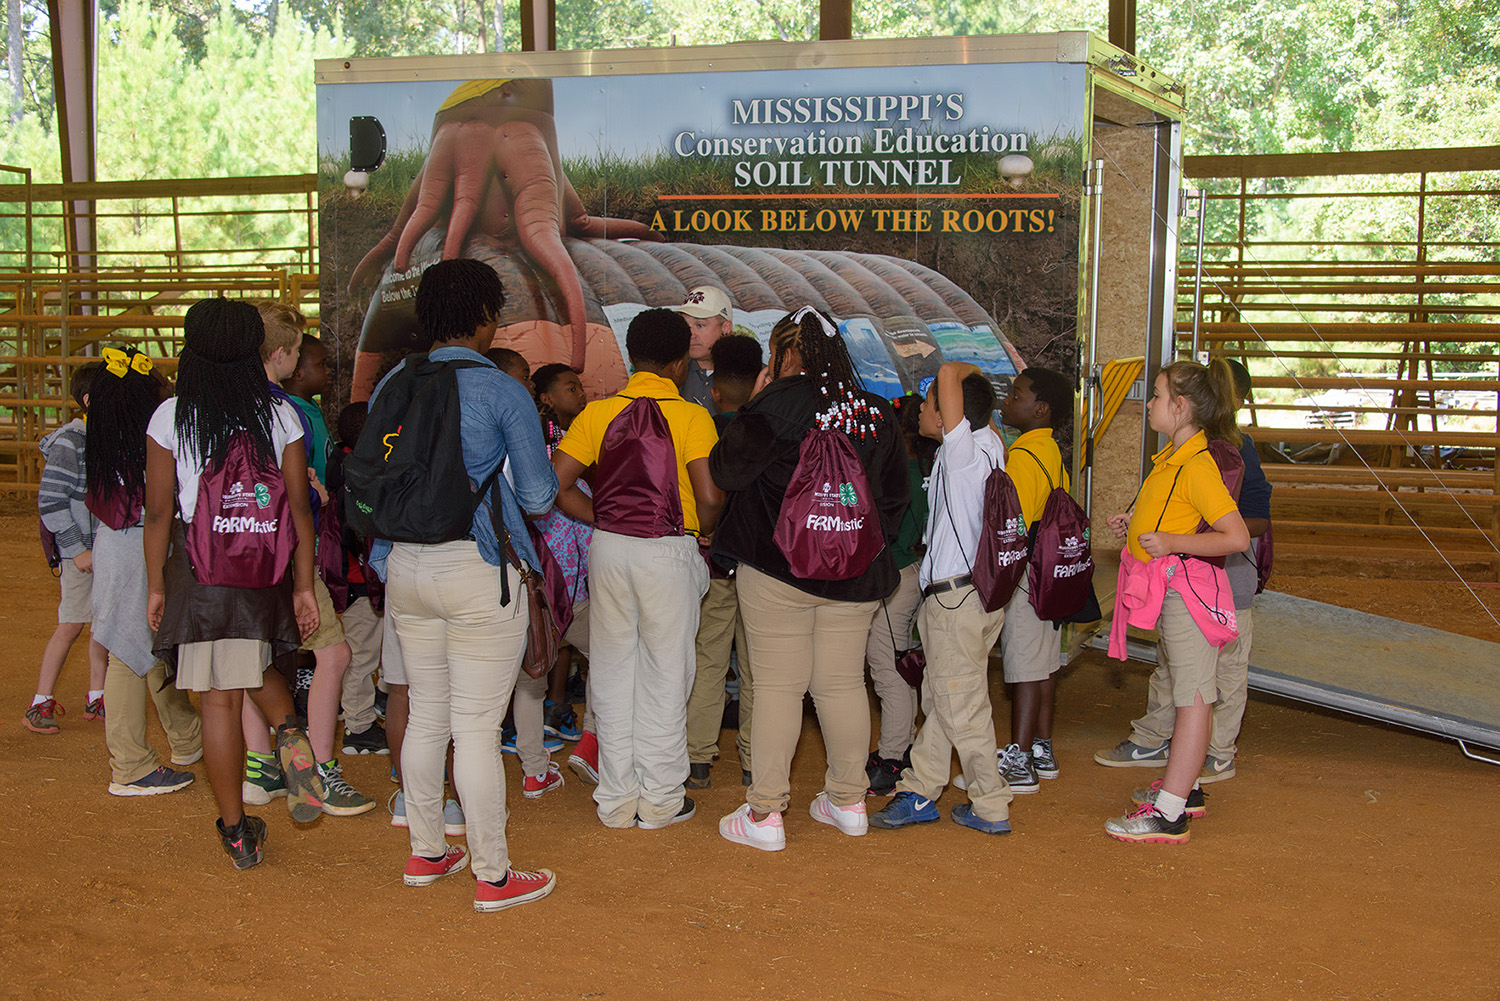 Elementary-age students wearing school uniforms gather around the soil tunnel truck to learn about the importance of soil before walking through the tunnel that gives them a look at what goes on underground.